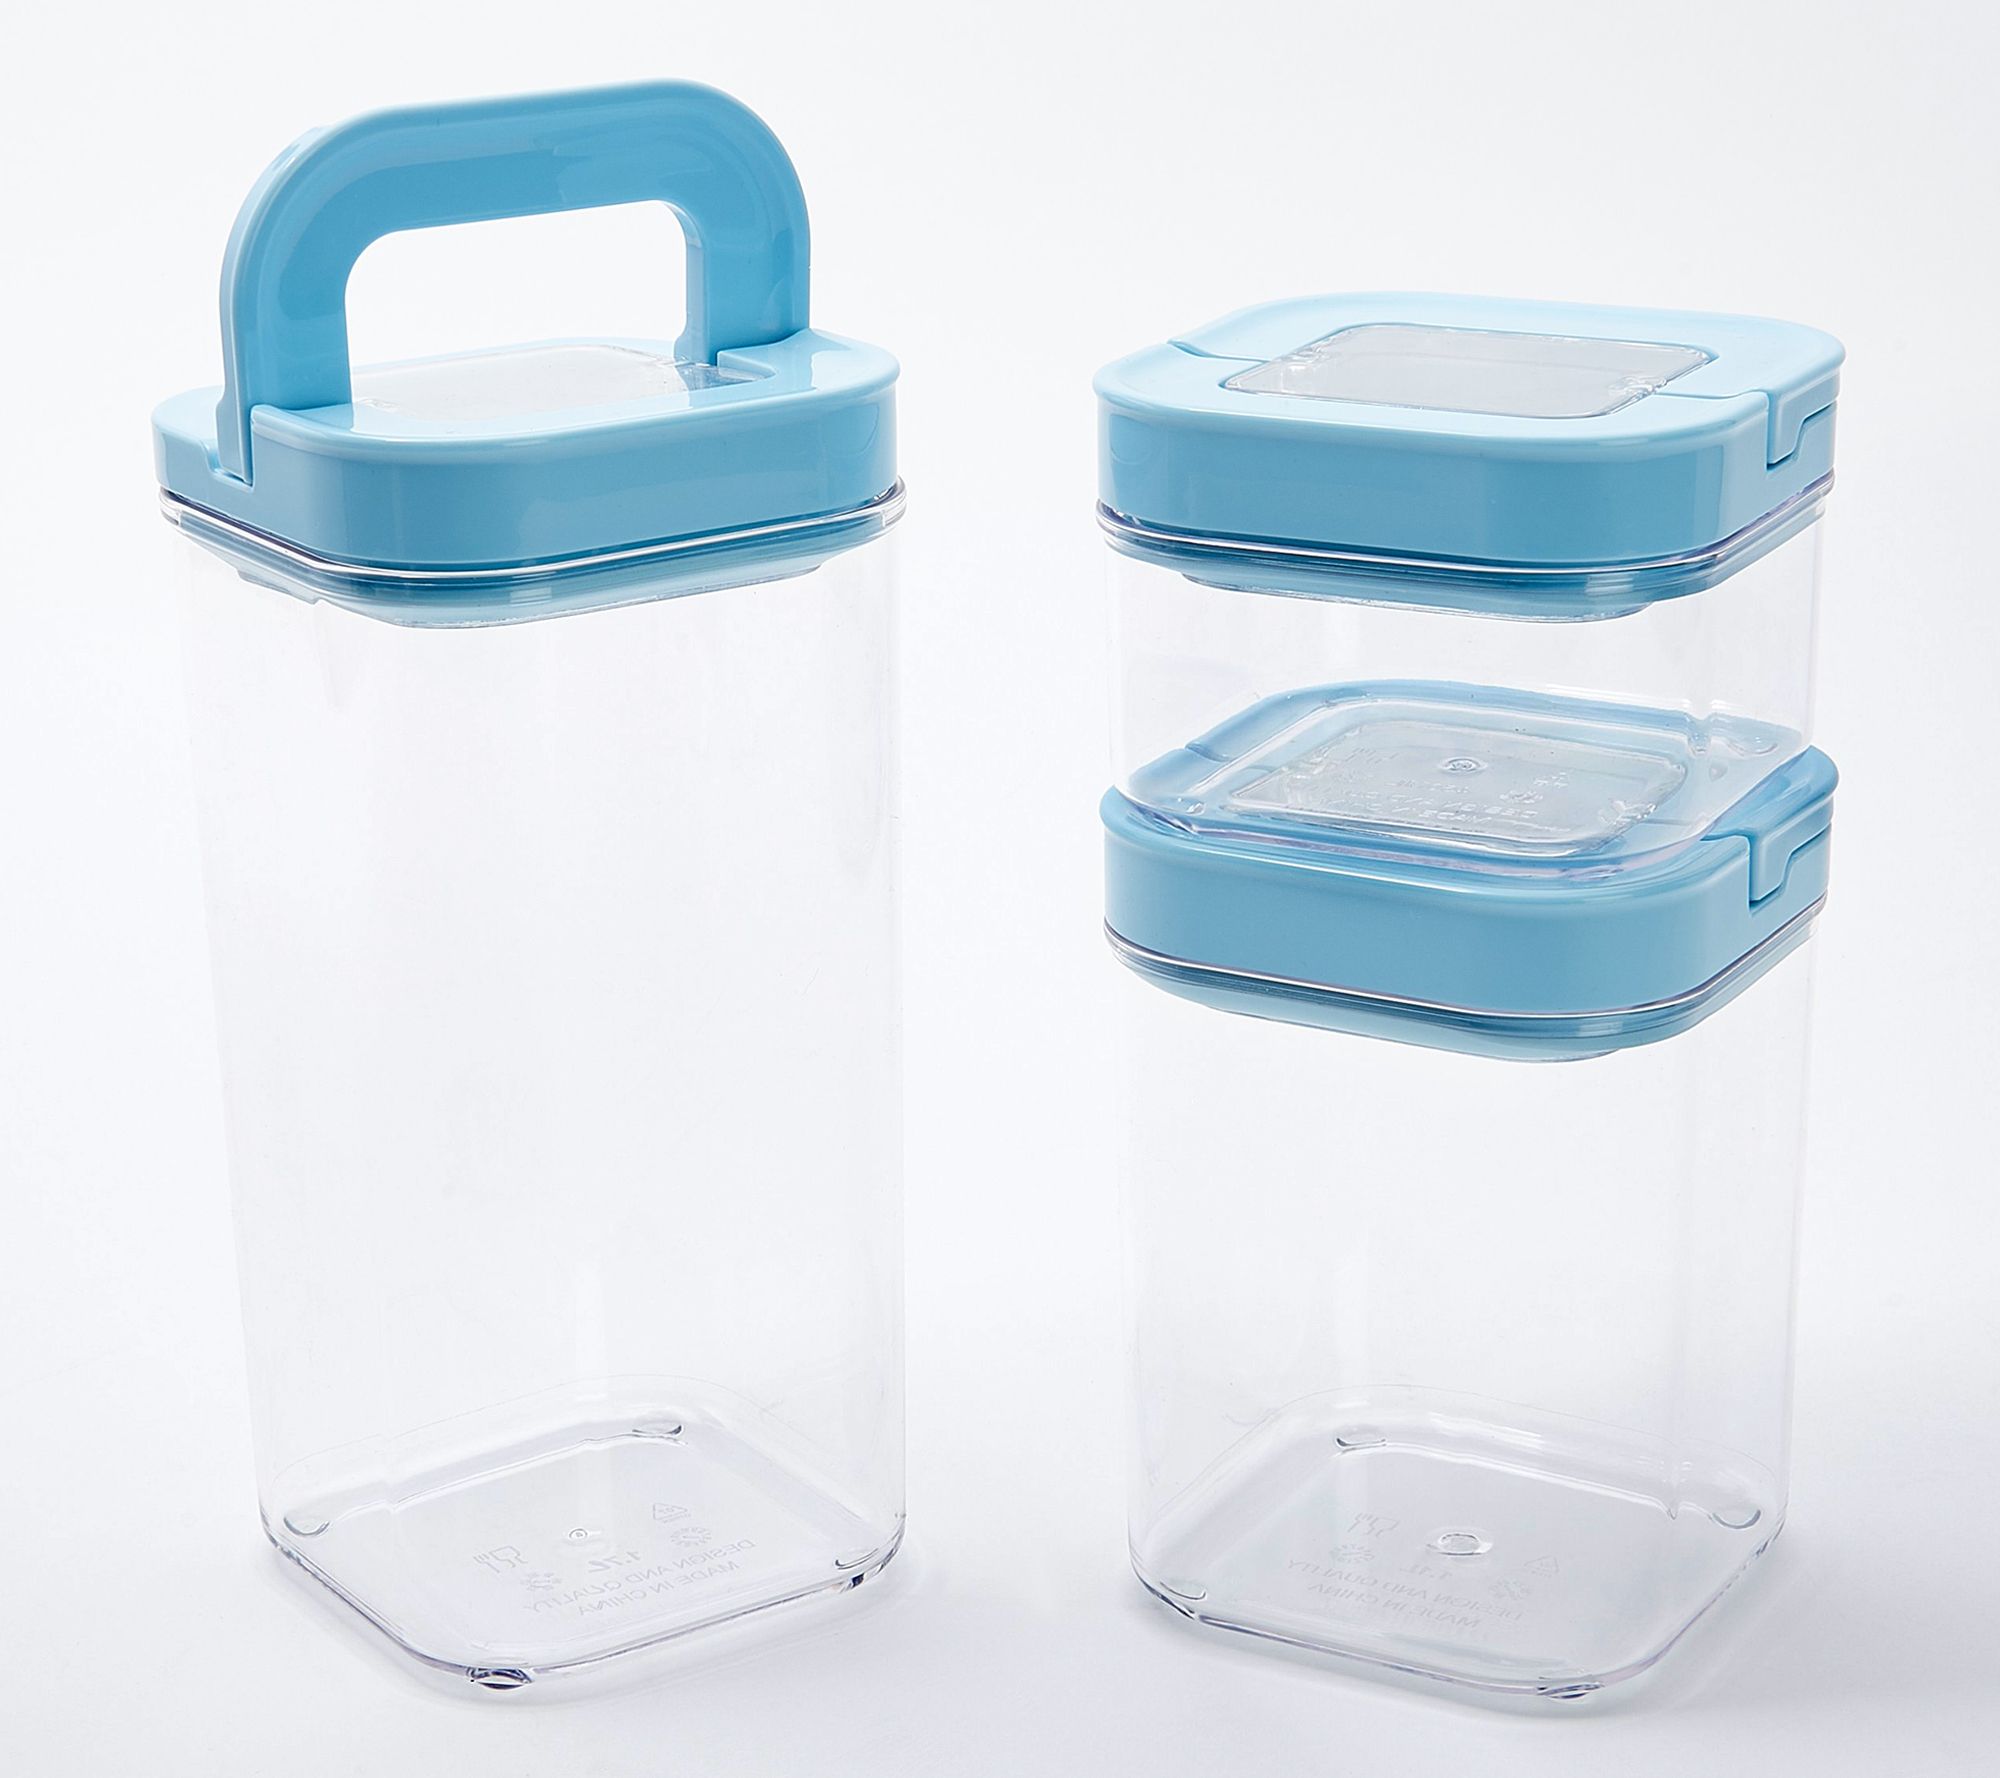 c e ll a 3-Piece Flip Lock Kitchen Storage Canisters